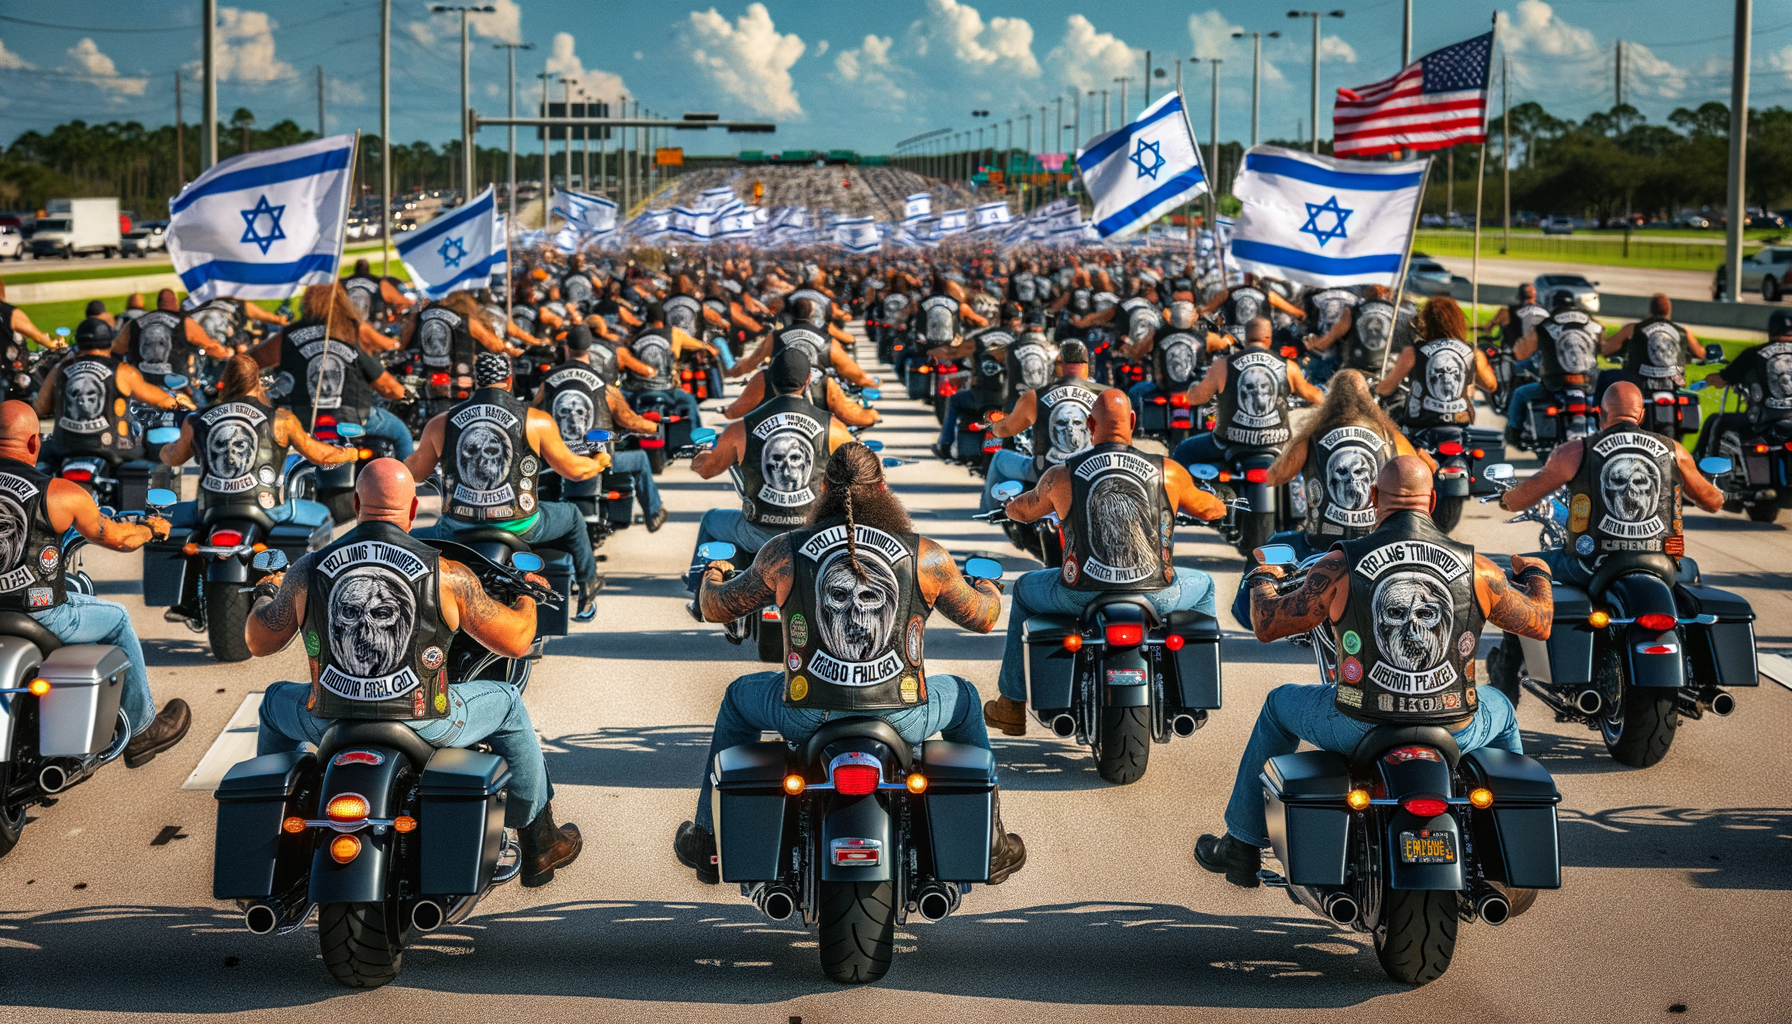 join the rolling thunder motorcycle club of south florida for the ride for israel in orlando, usa. experience the thrill of the ride and show your support for israel with fellow riders from across the country.